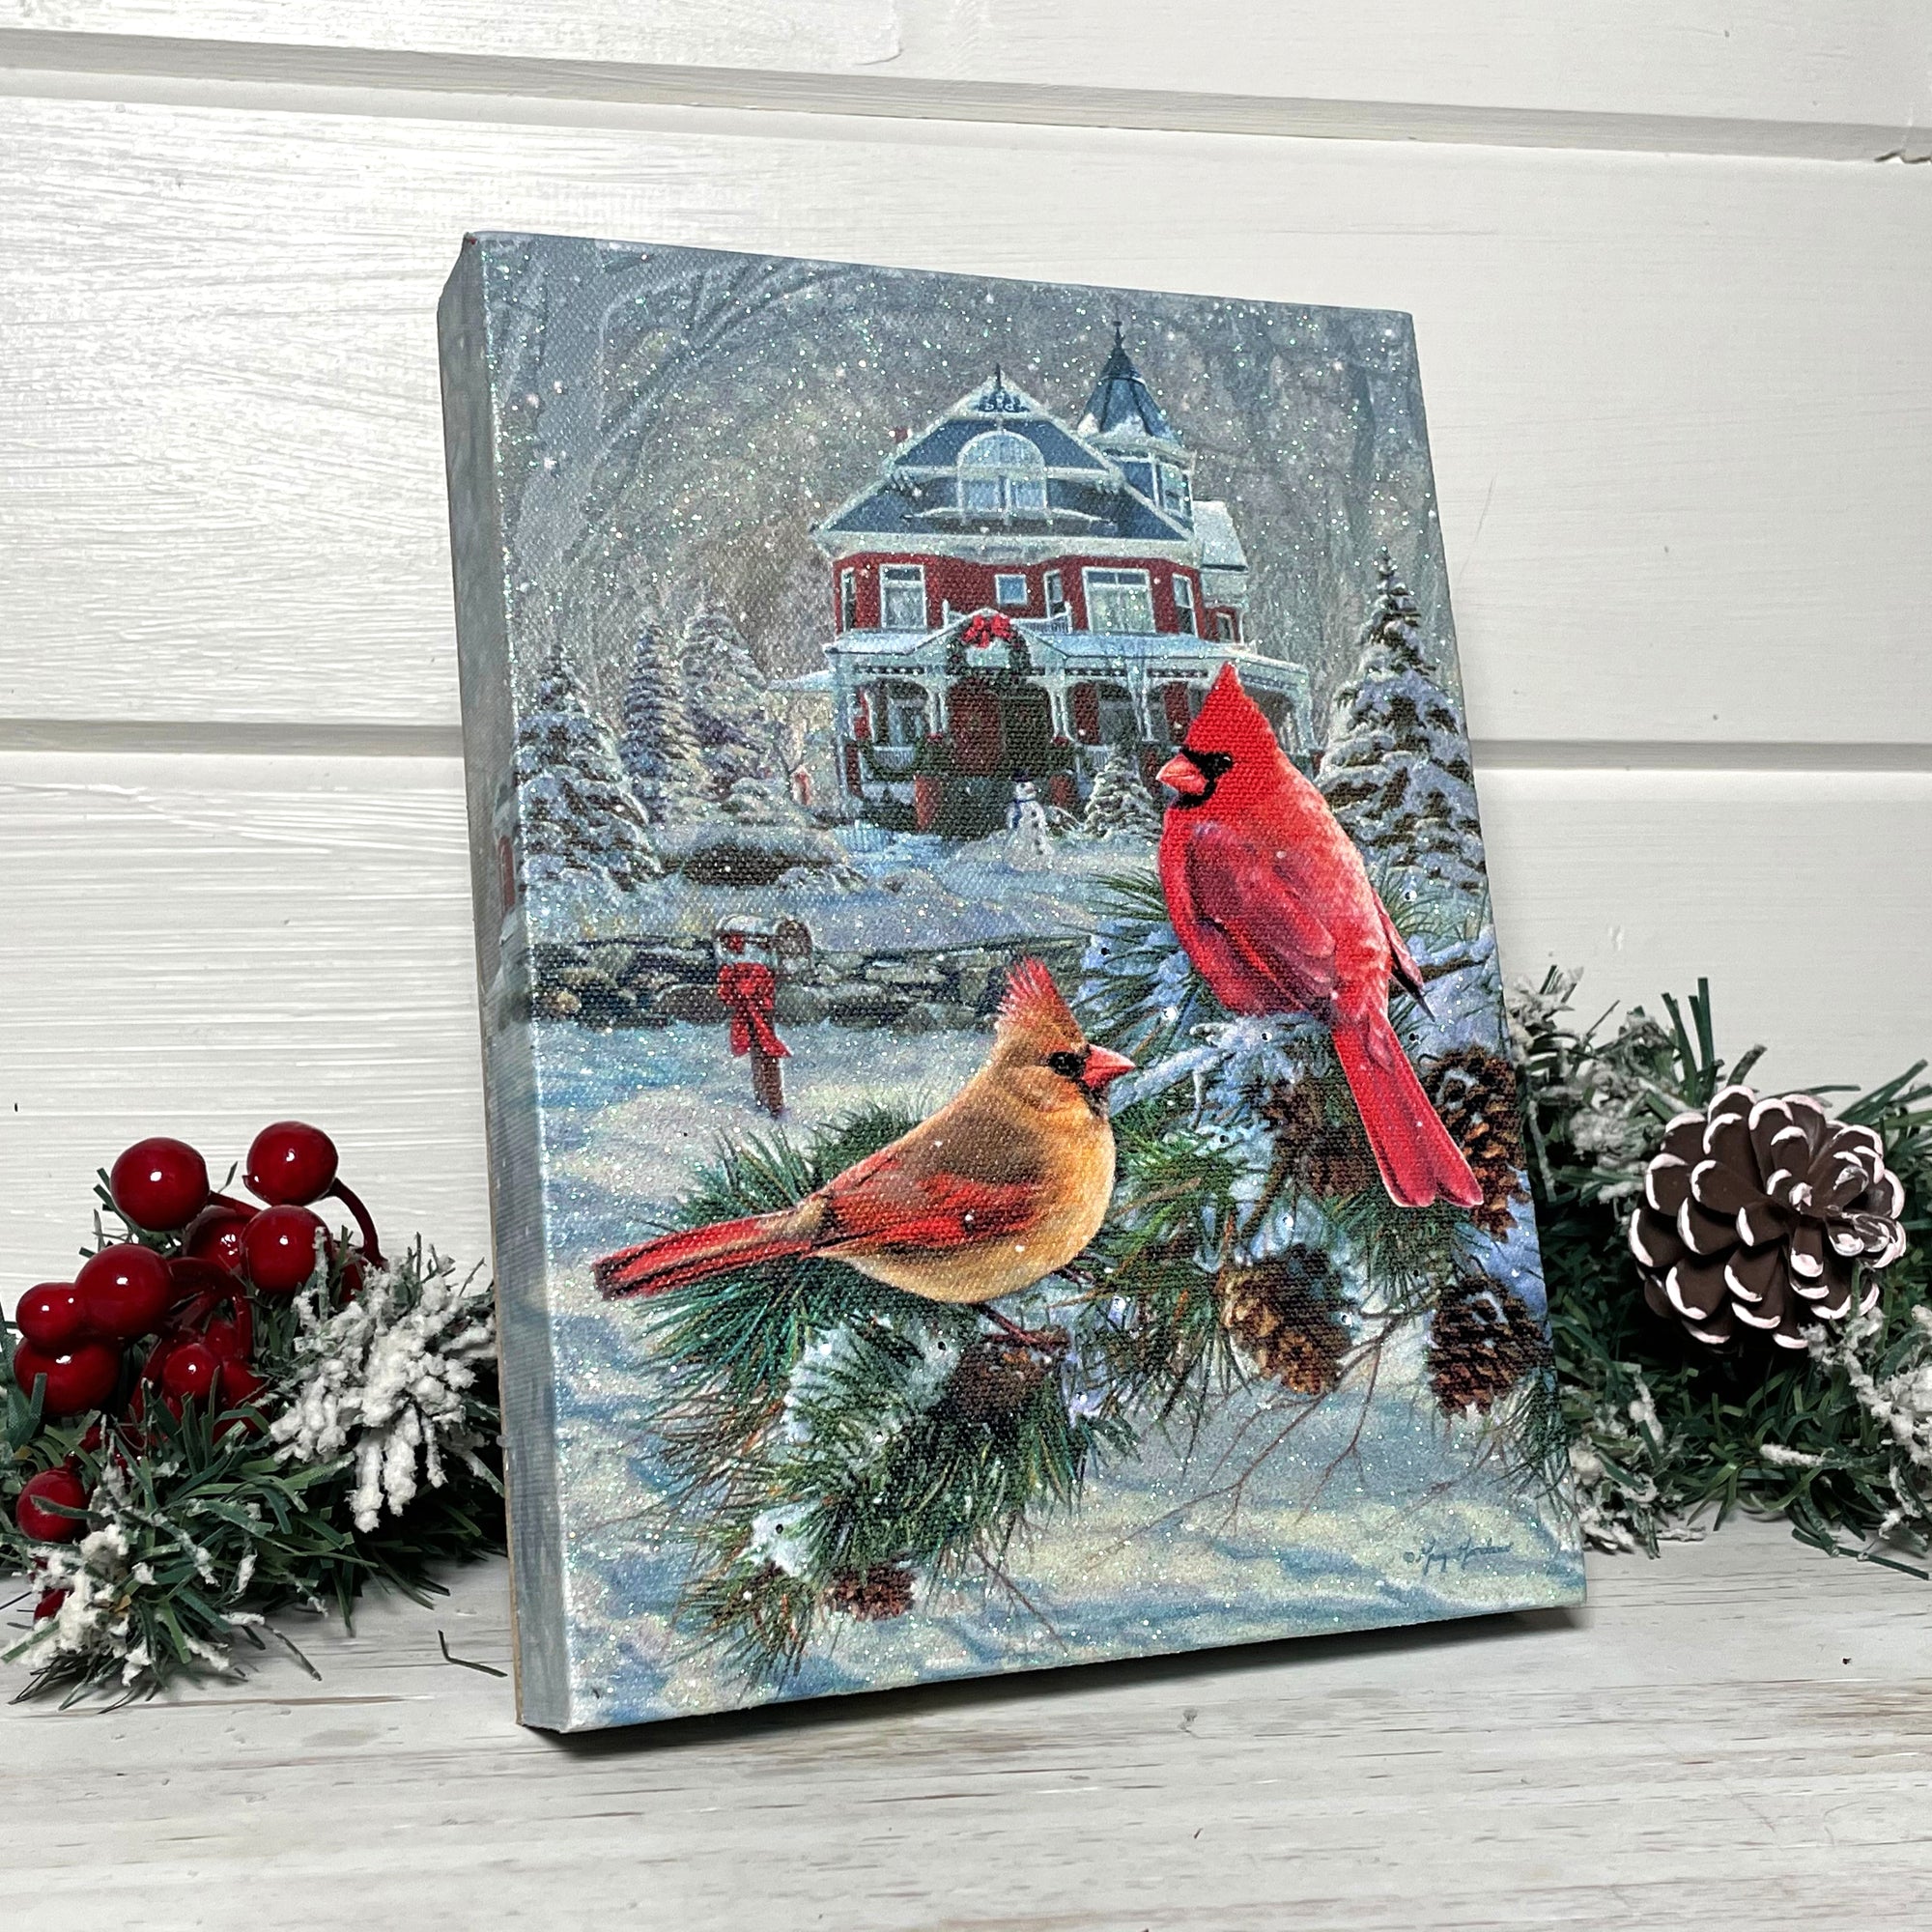  two cardinals sitting on a snow-covered branch and a charming Victorian house in the background. The wreath above the door and the snowman in the front yard add a touch of festive cheer to this picturesque scene.